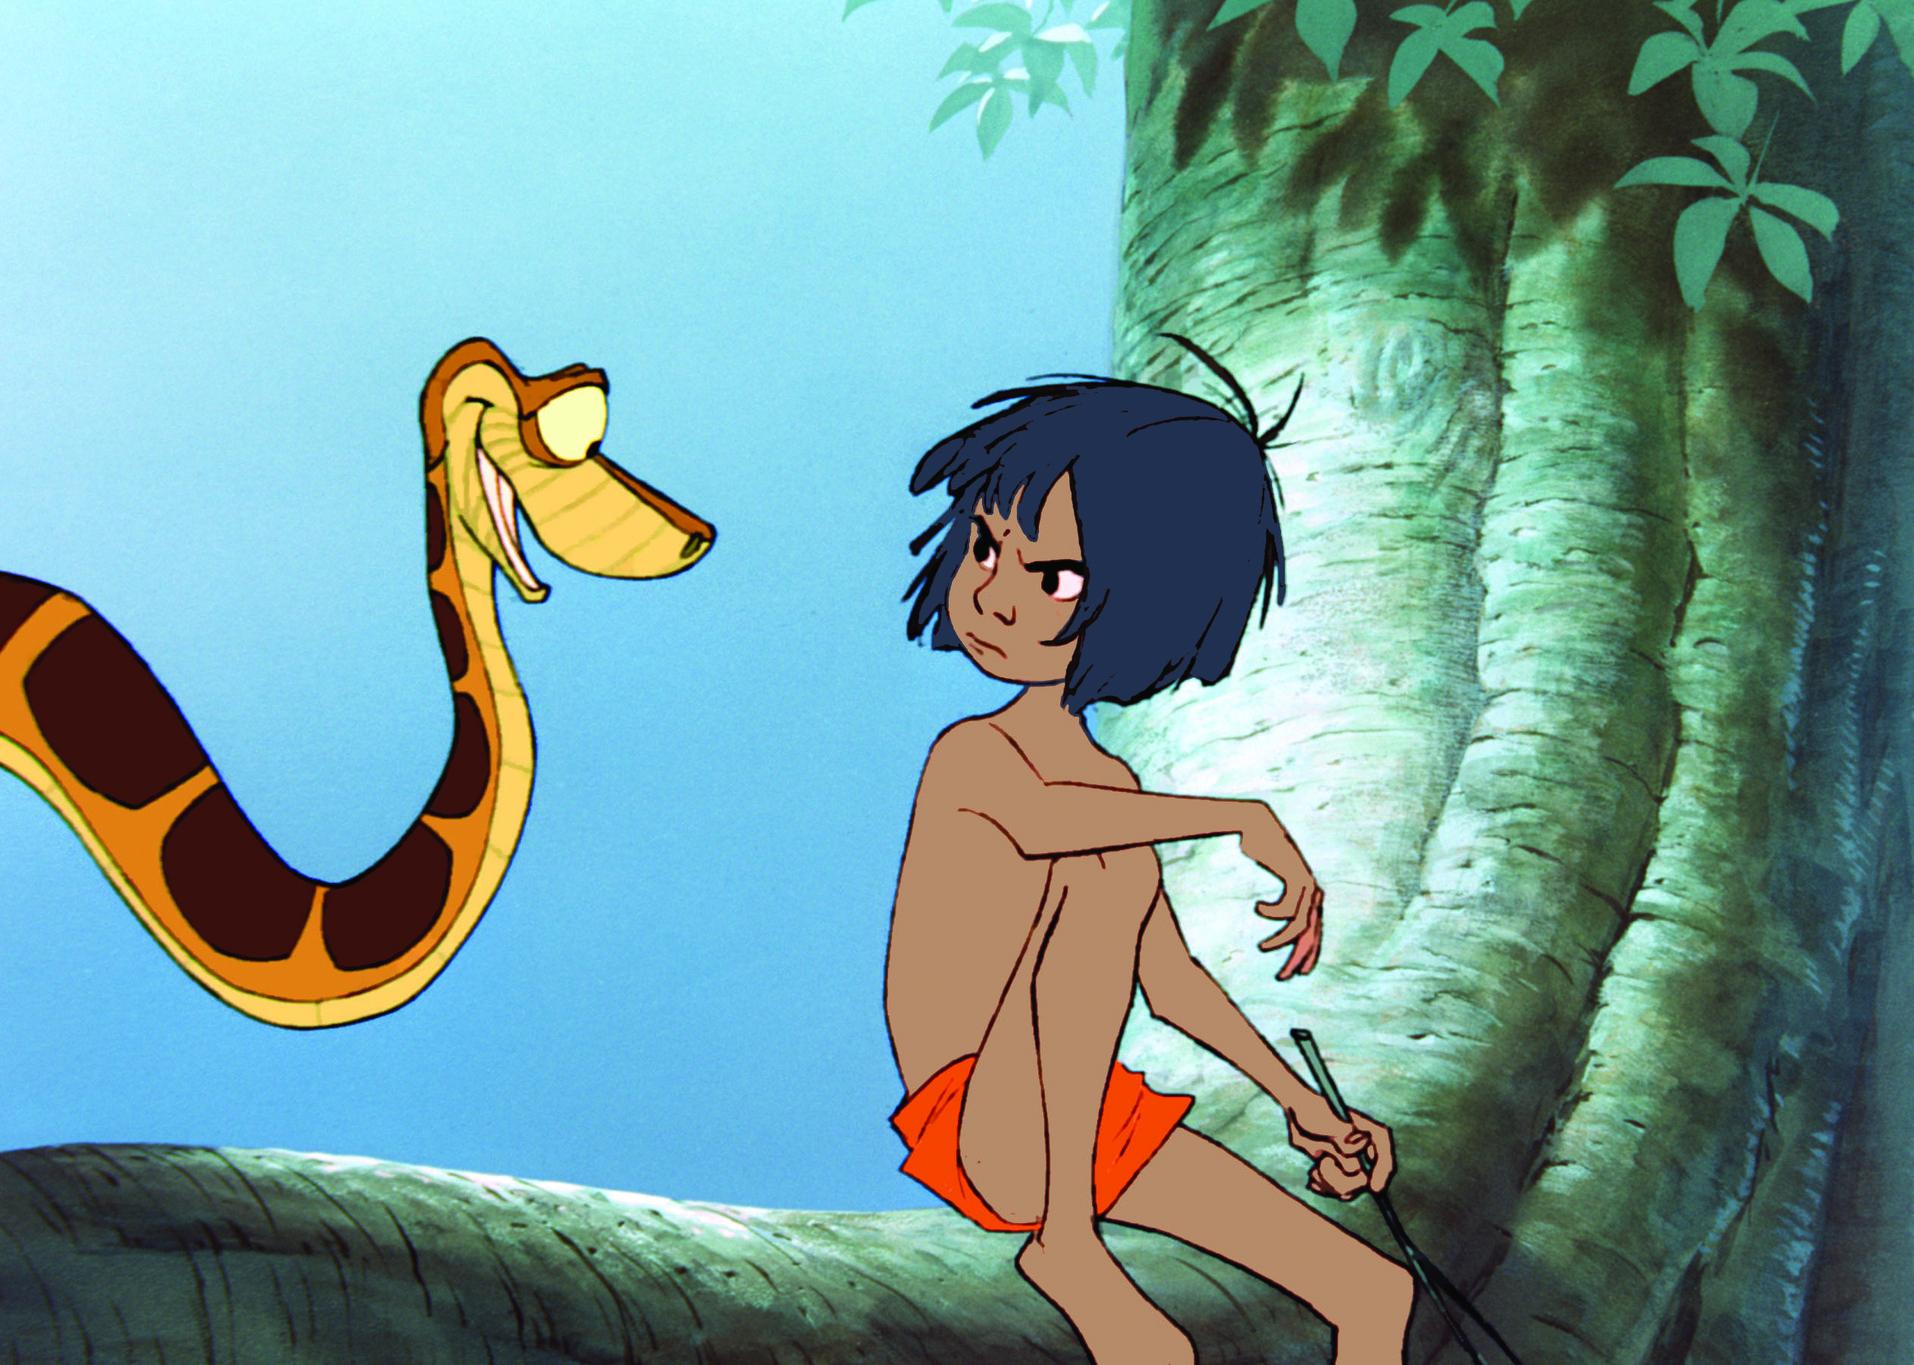 A cartoon of a young Mowgli looking angrily at a snake, Kaa, on a tree branch next to him.